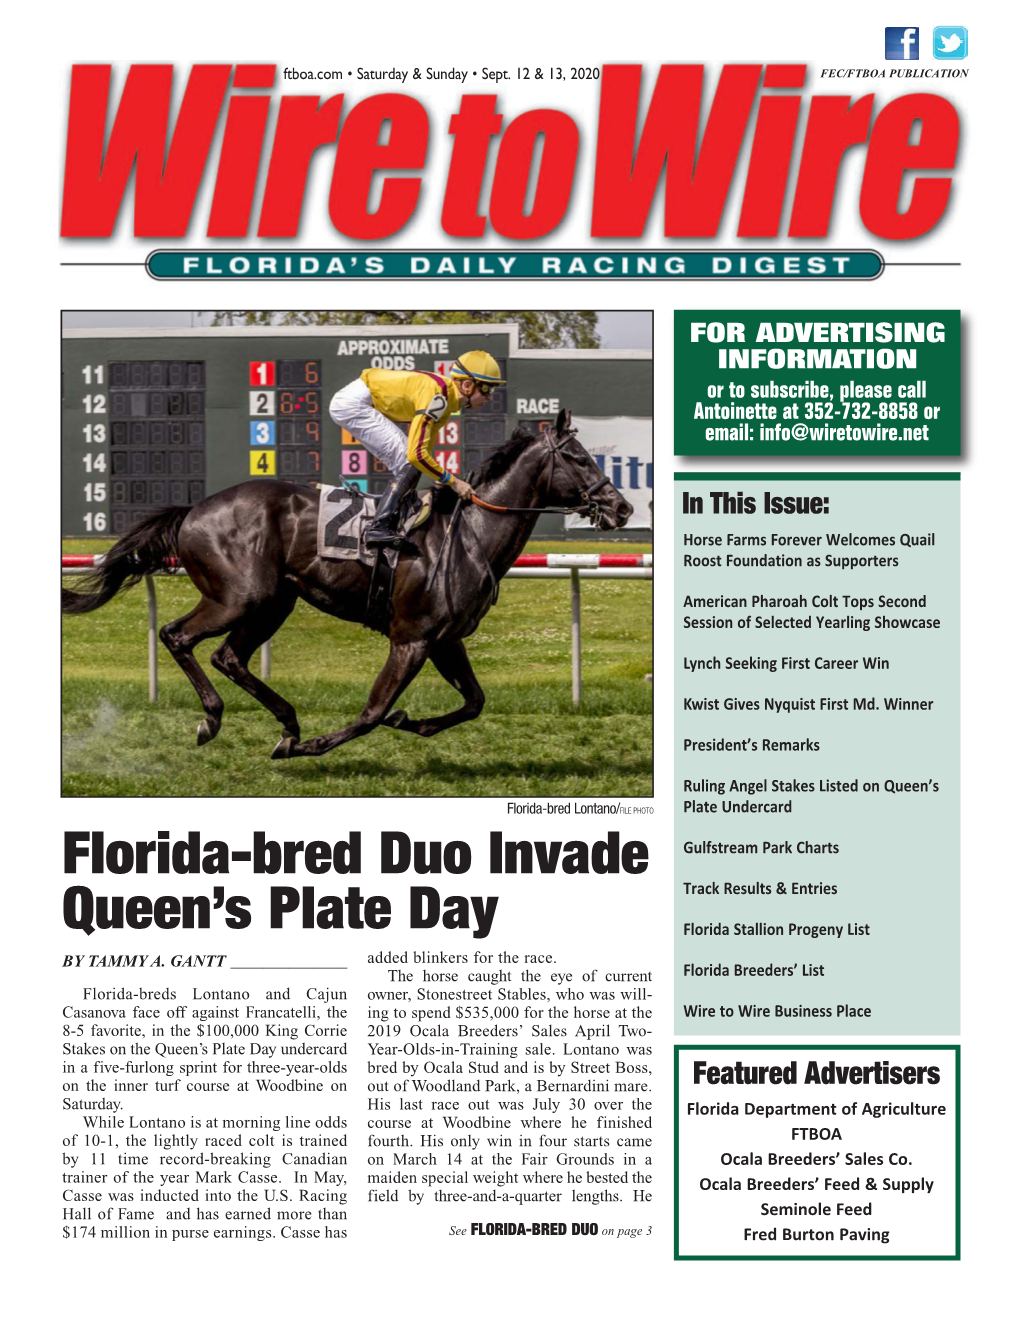 Florida-Bred Duo Invade Queen's Plate